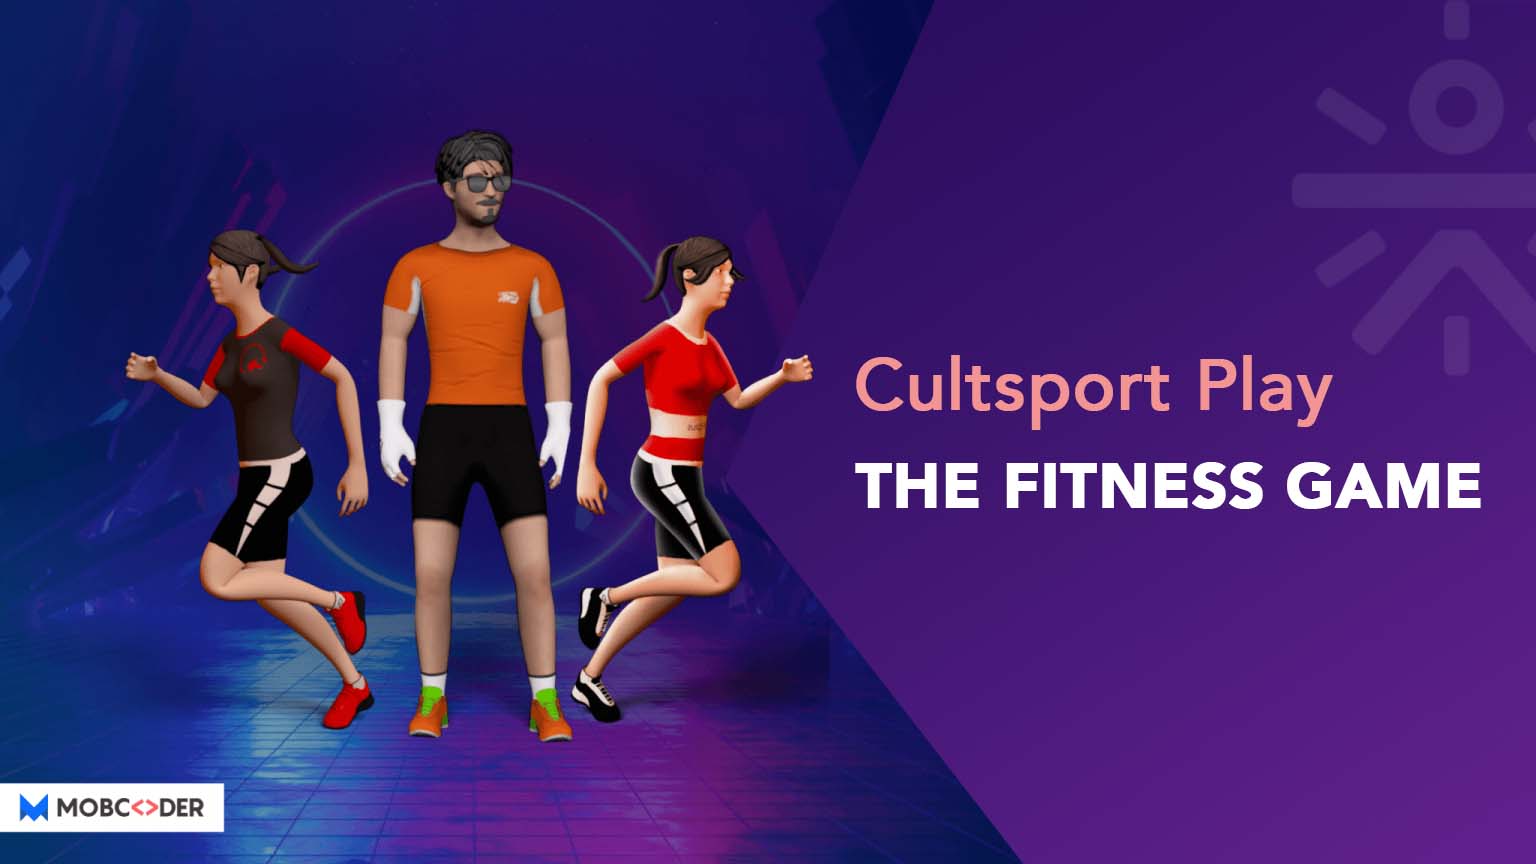 Cultsport Play: The Fitness Game